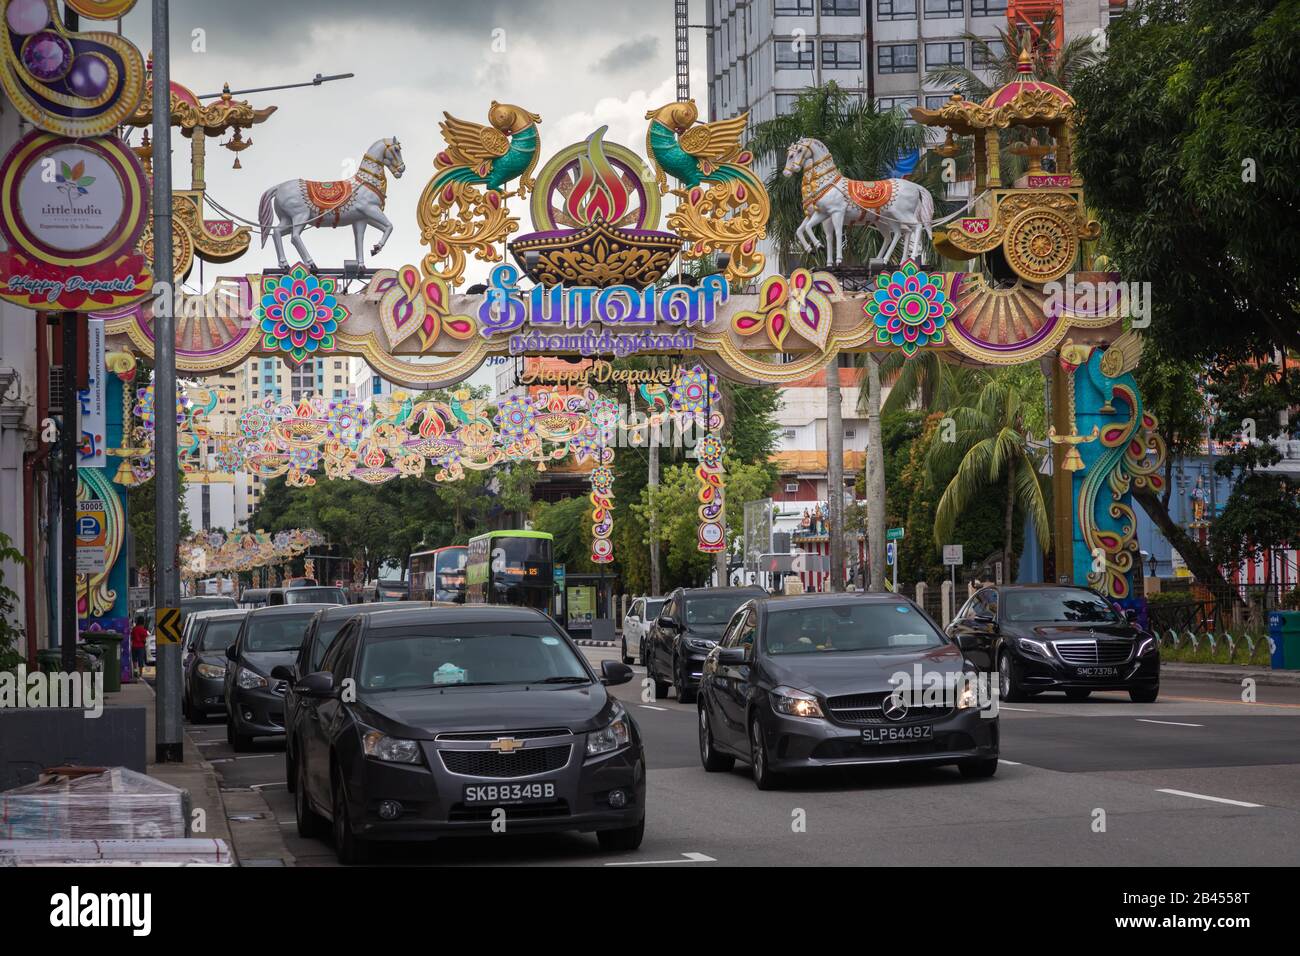 Street in Little India decorated for Divali-Festival, Singapore Stock Photo